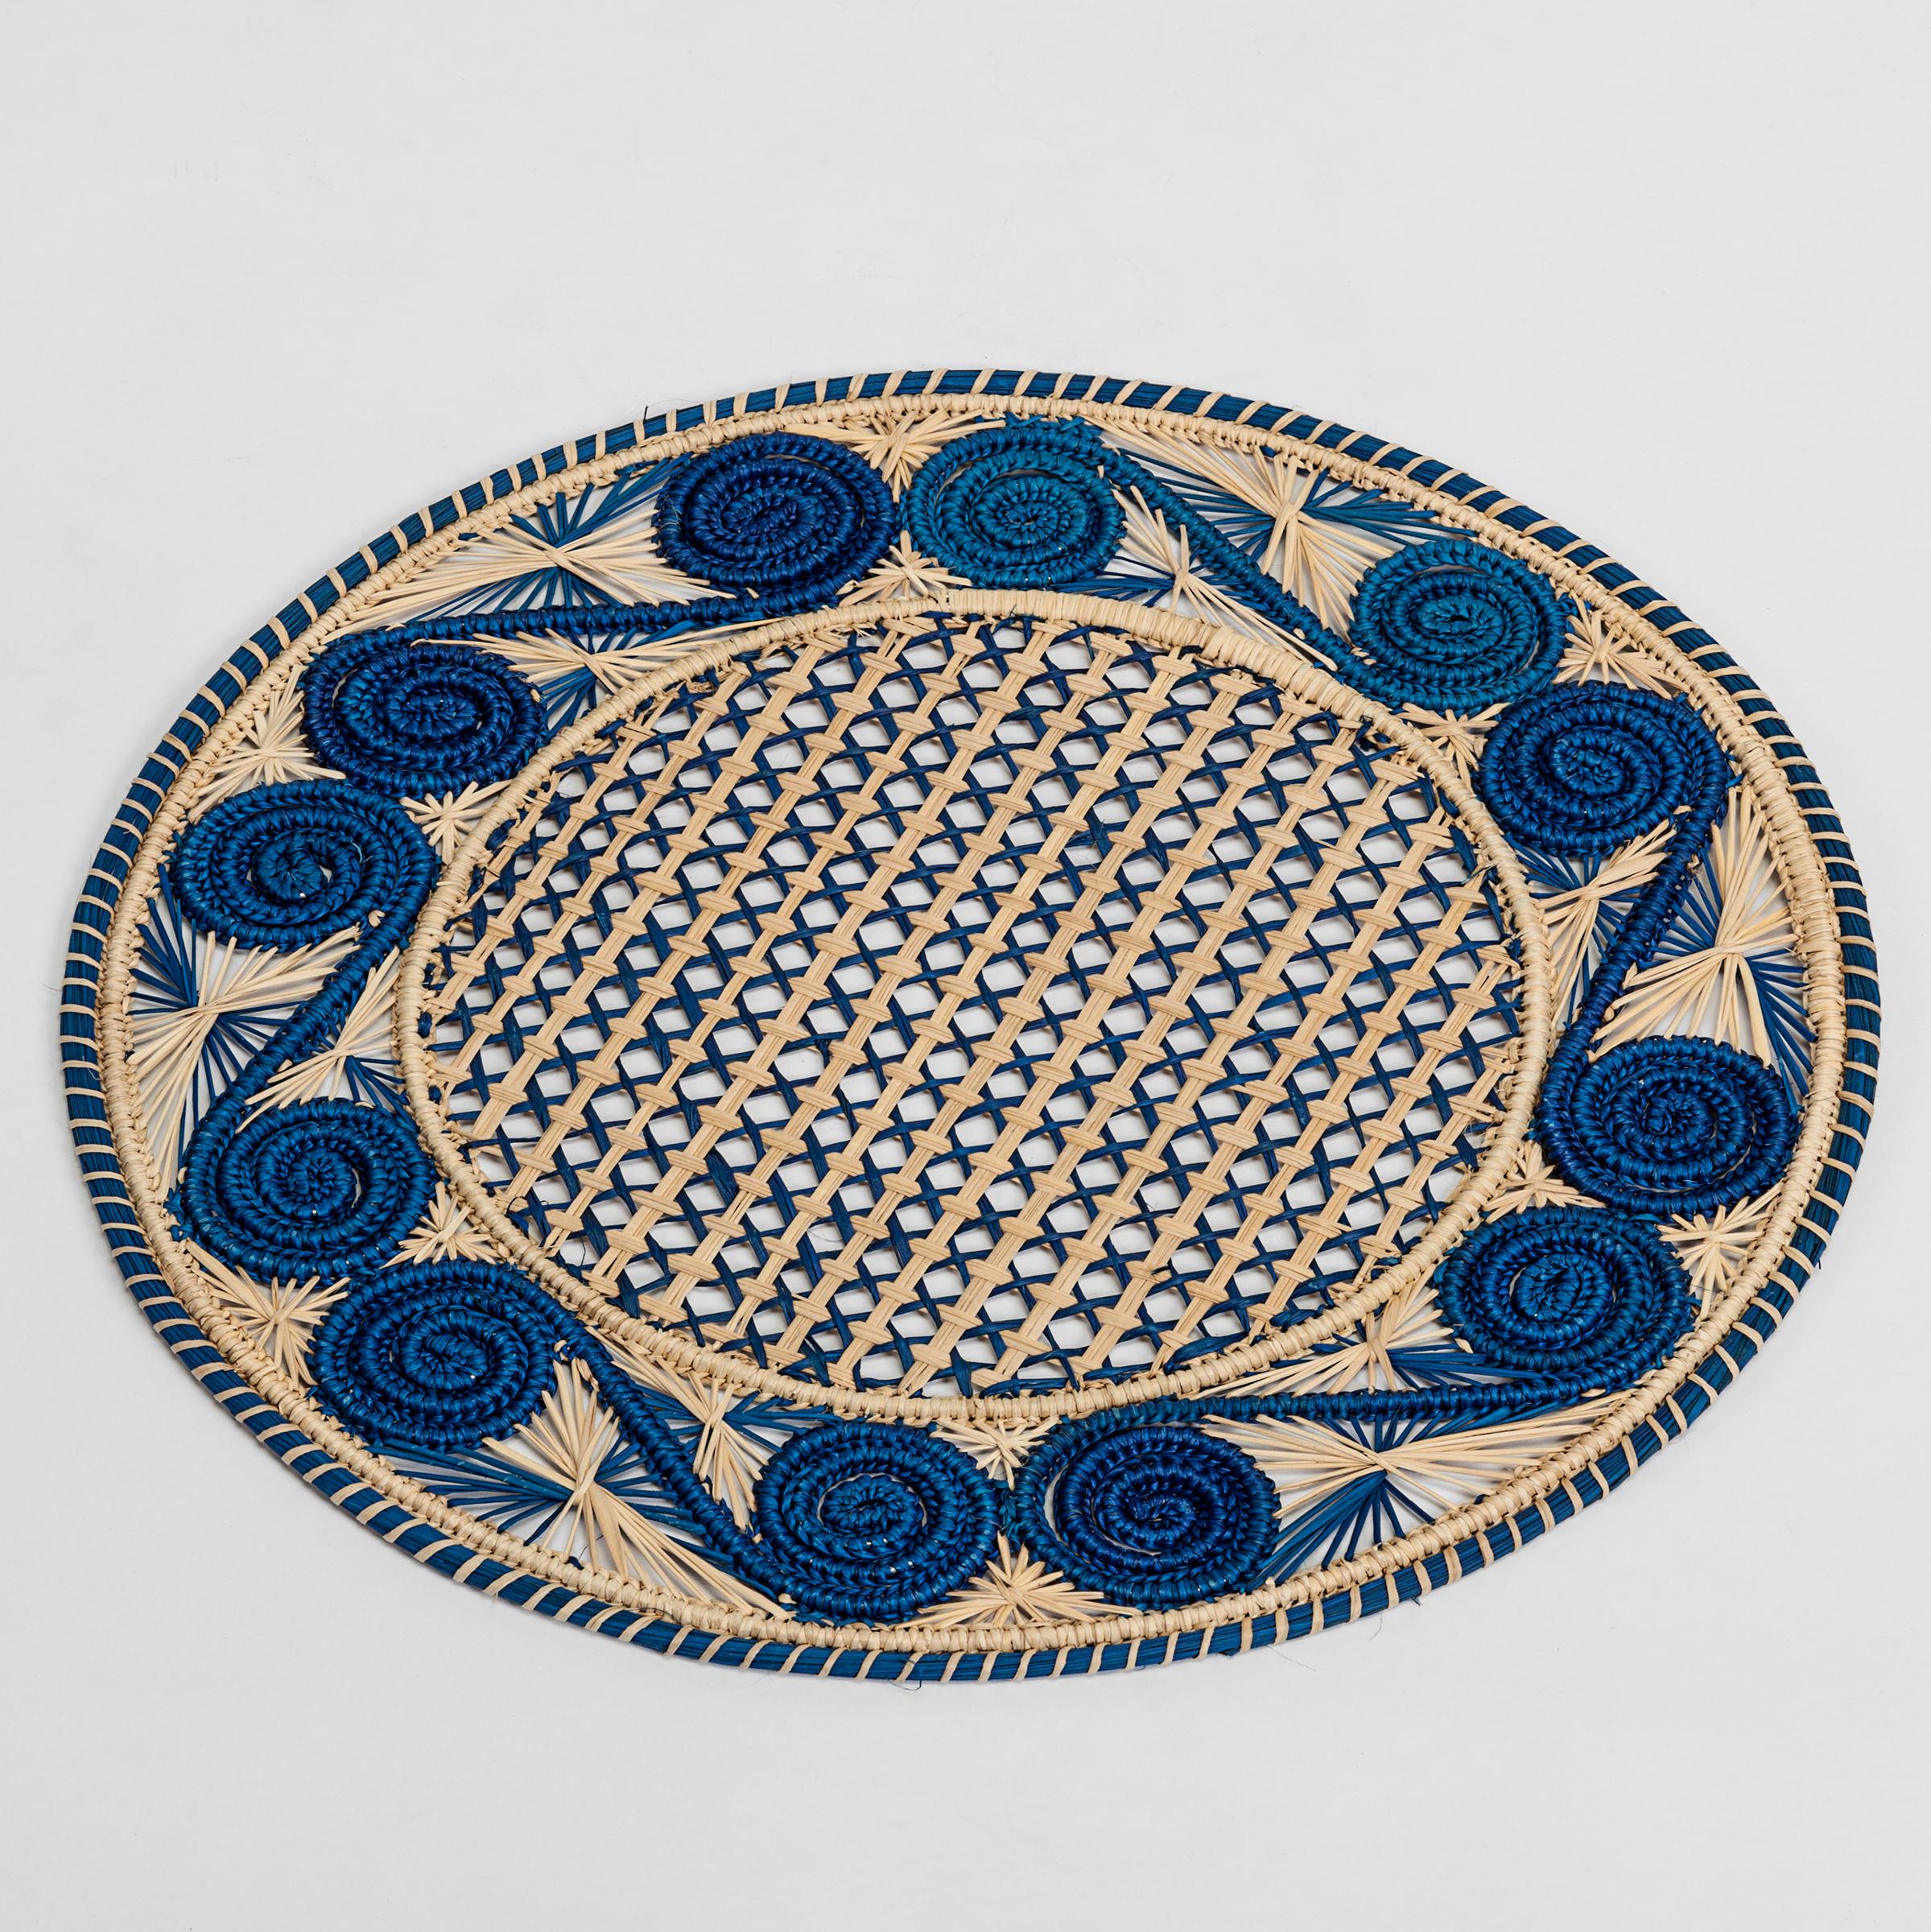 Other Handwoven Blue and Cream Iraca Fibre Placemat’s’ Made in Colombia